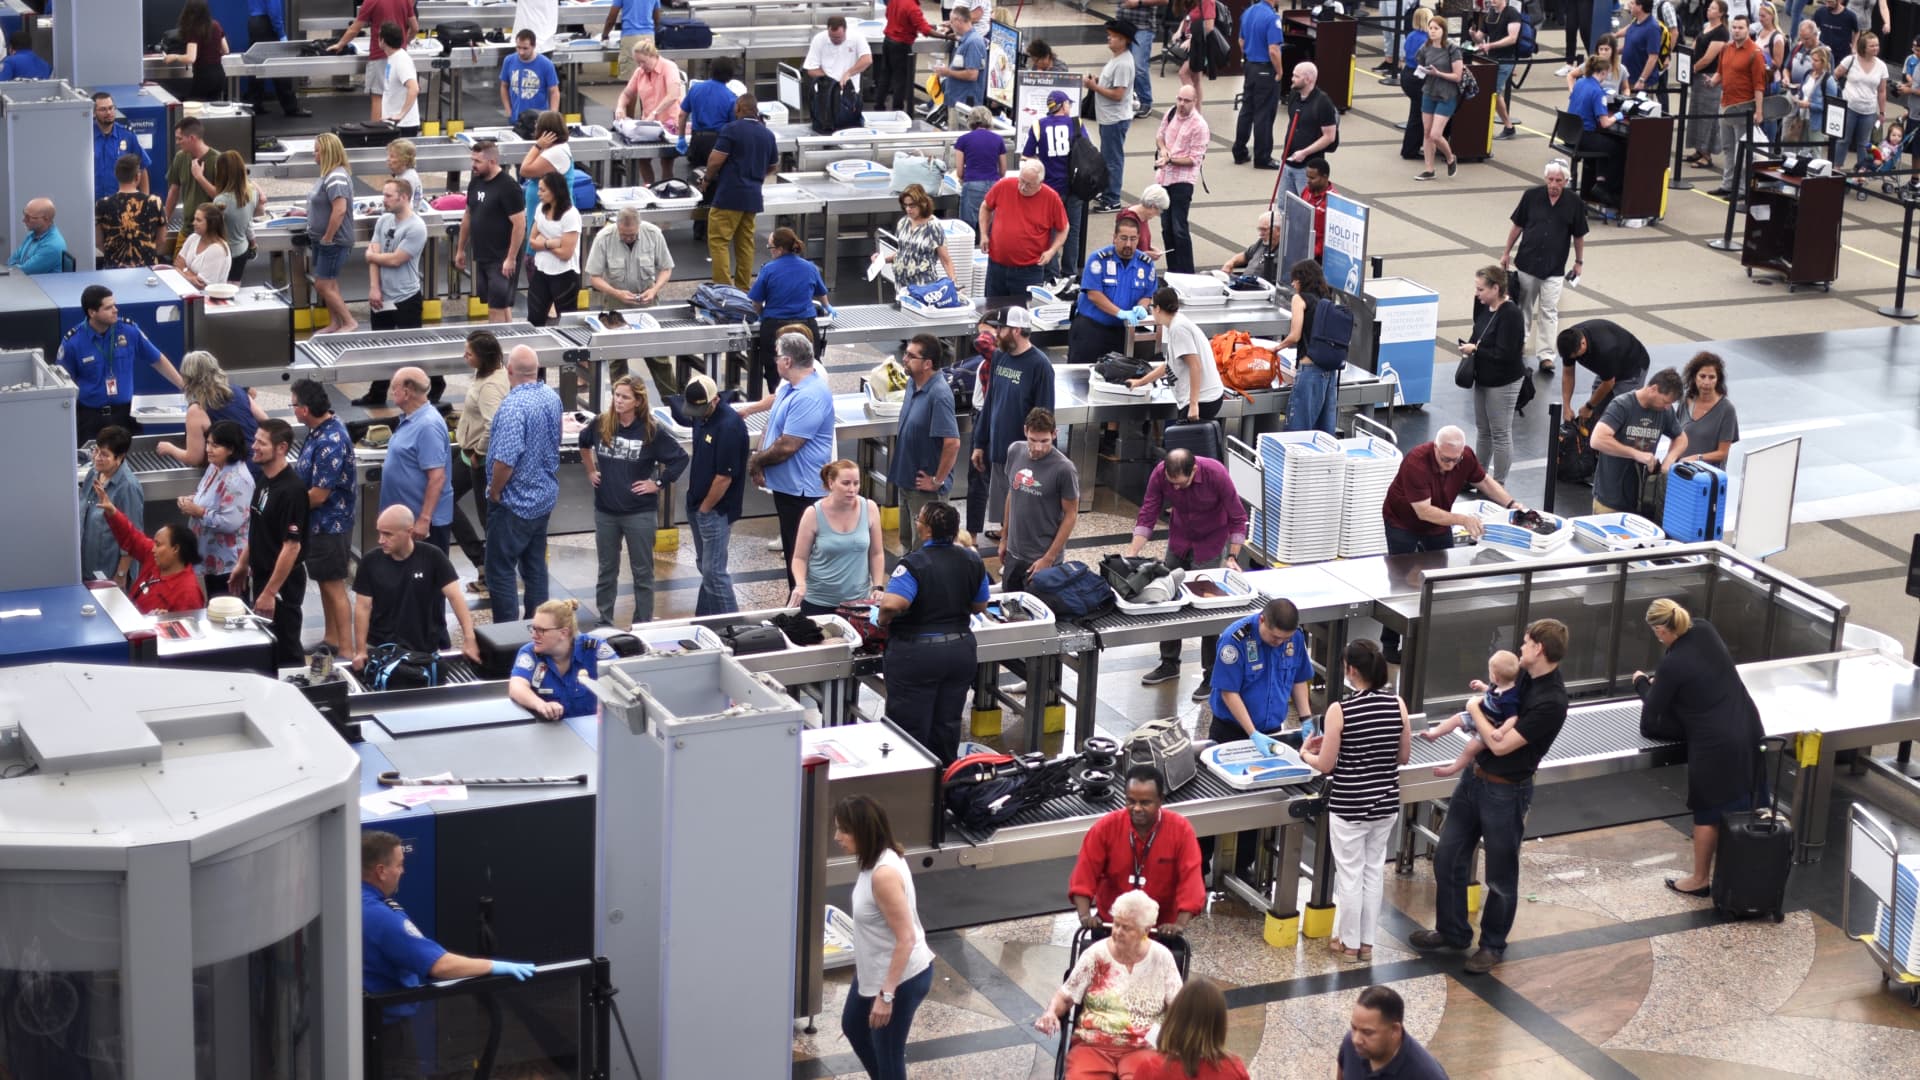 TSA sees ‘concerning’ rise in number of firearms at security checkpoints – and most are loaded